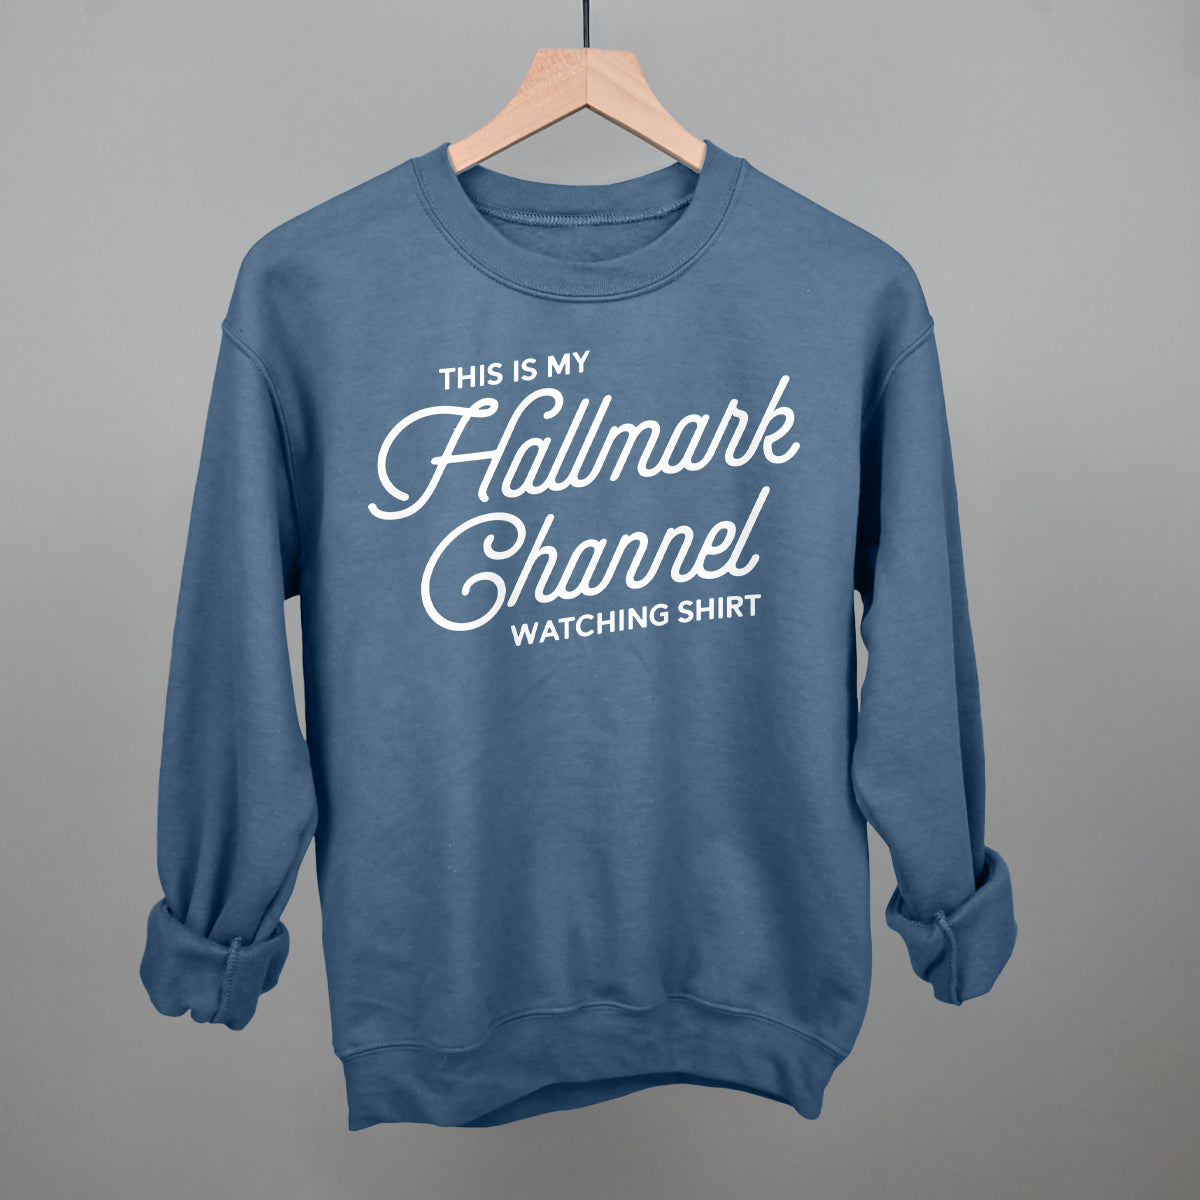 This Is My Hallmark Channel Watching Shirt